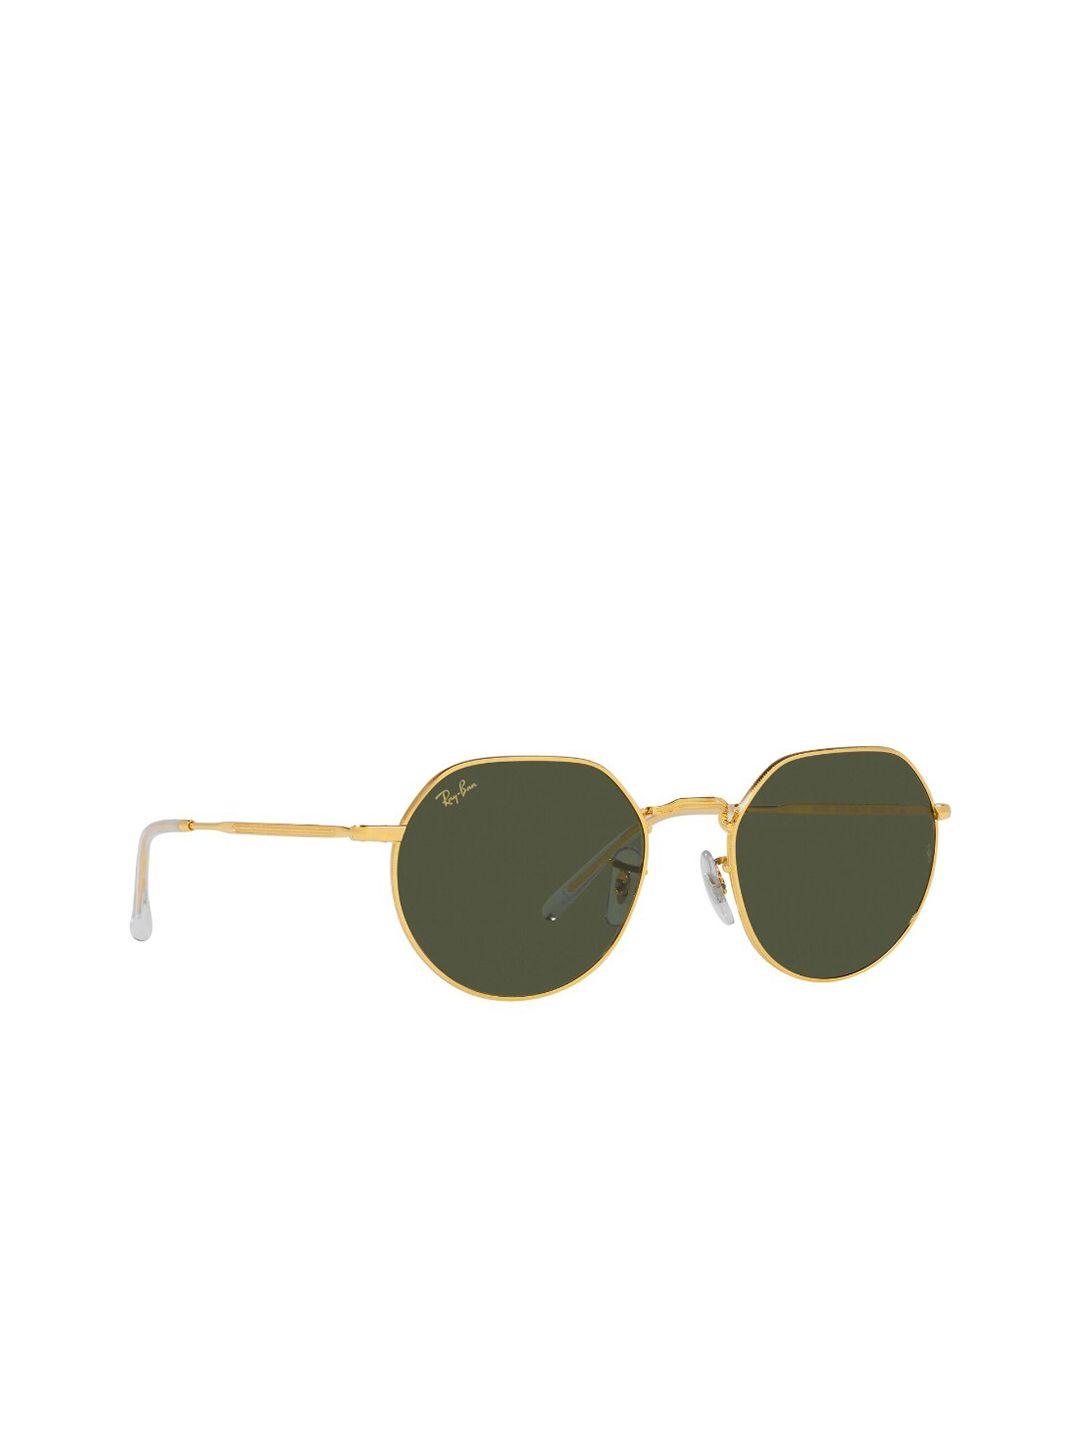 ray-ban unisex green lens & gold-toned uv protected oversized sunglasses 8056597445184